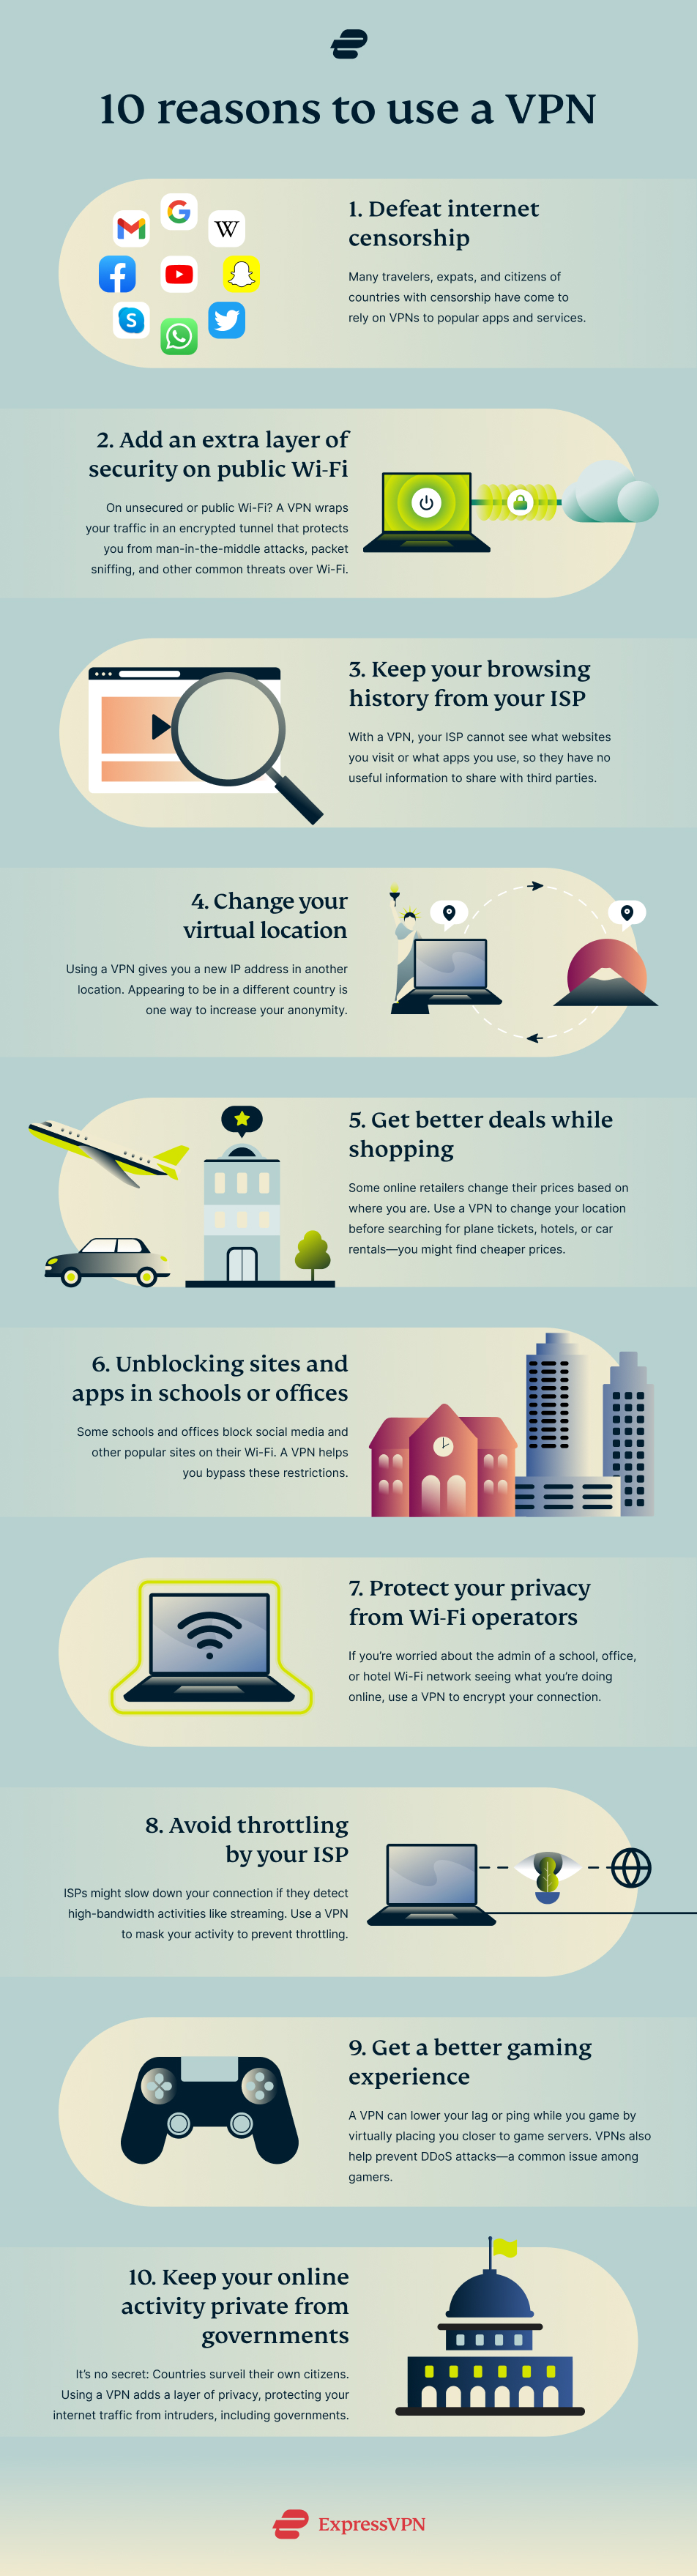 Infographic on 10 ways to use a VPN.